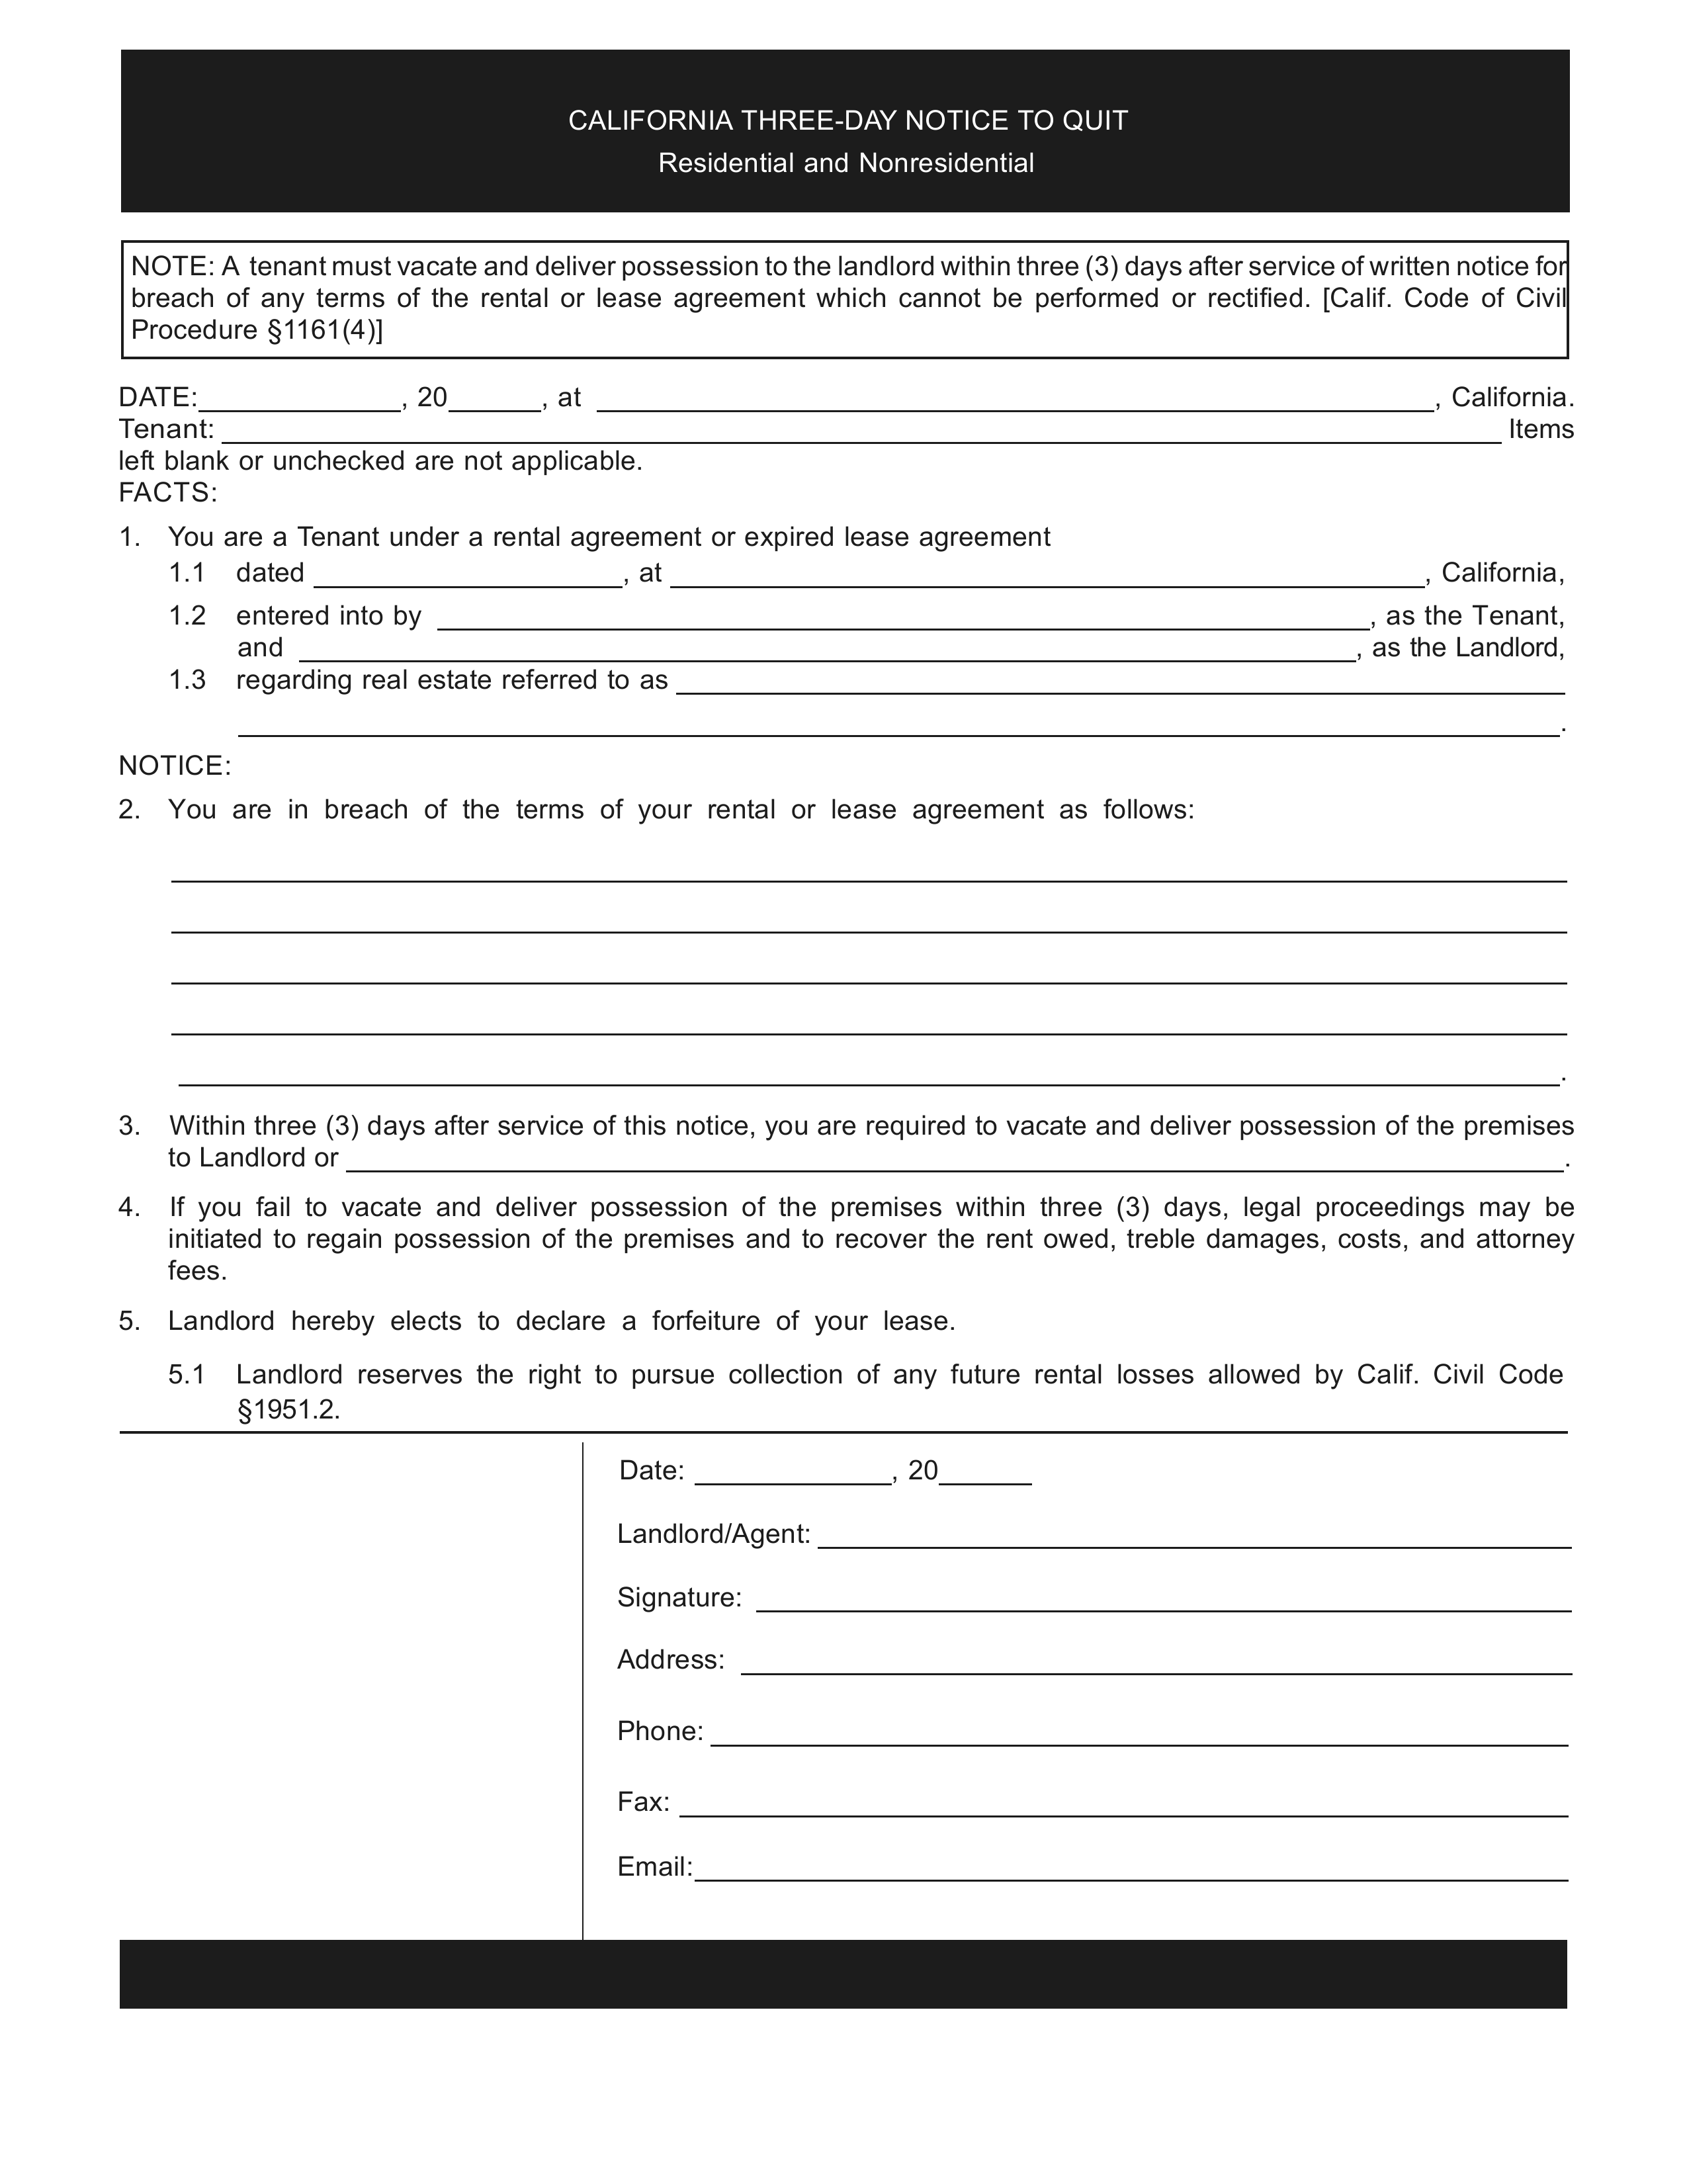 California 3-Day Notice to Quit Form | Non-Compliance (Incurable)